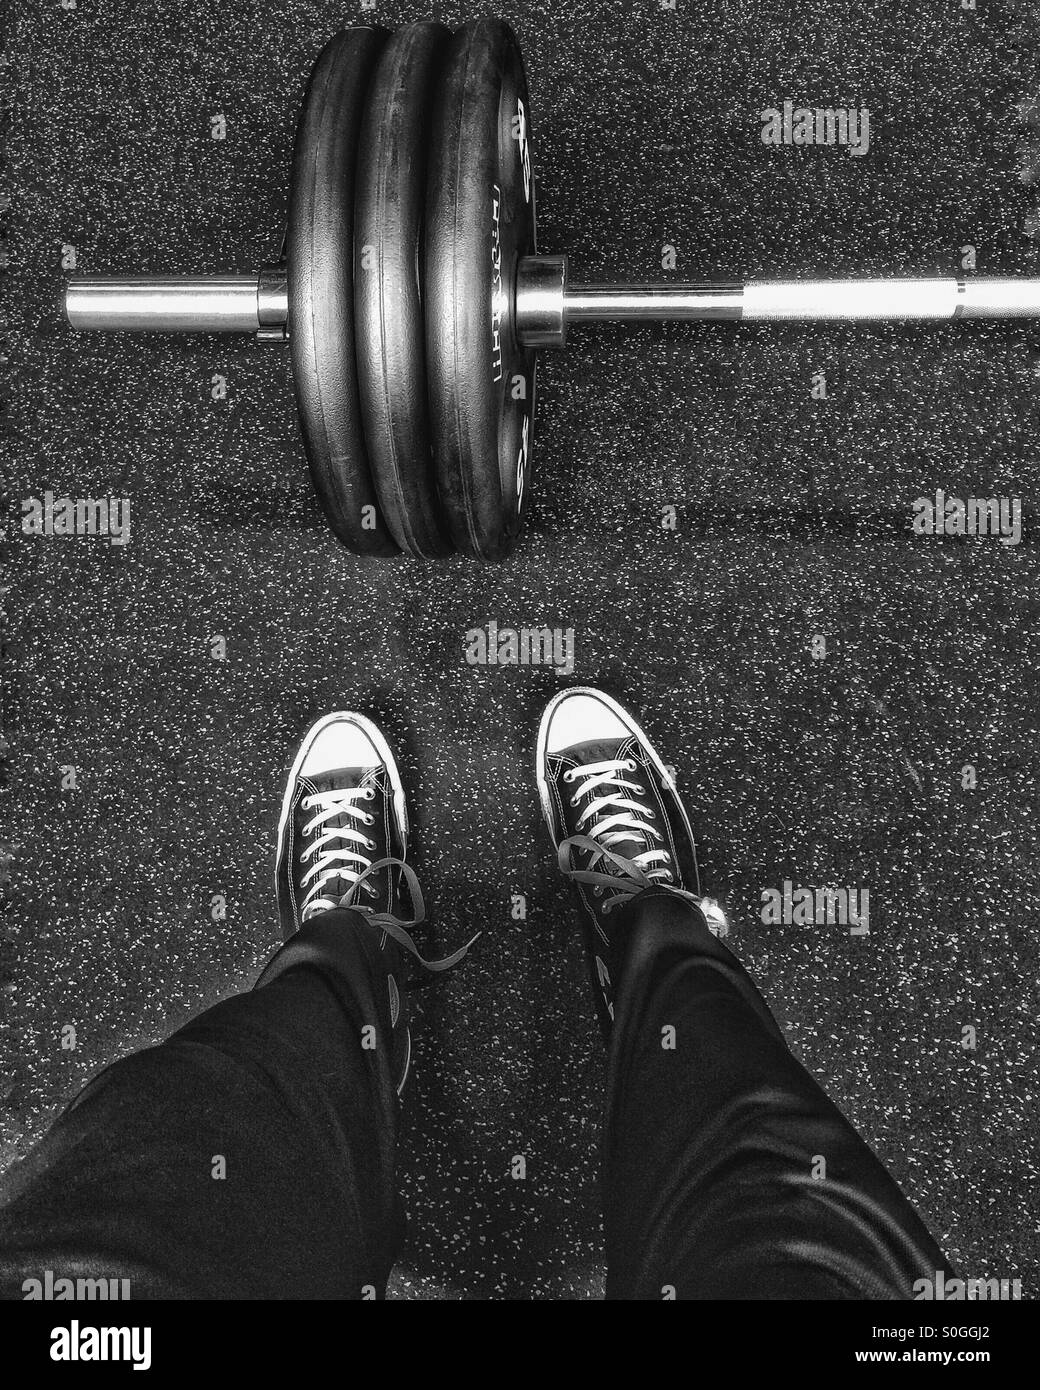 Deadlifts at the gym Stock Photo